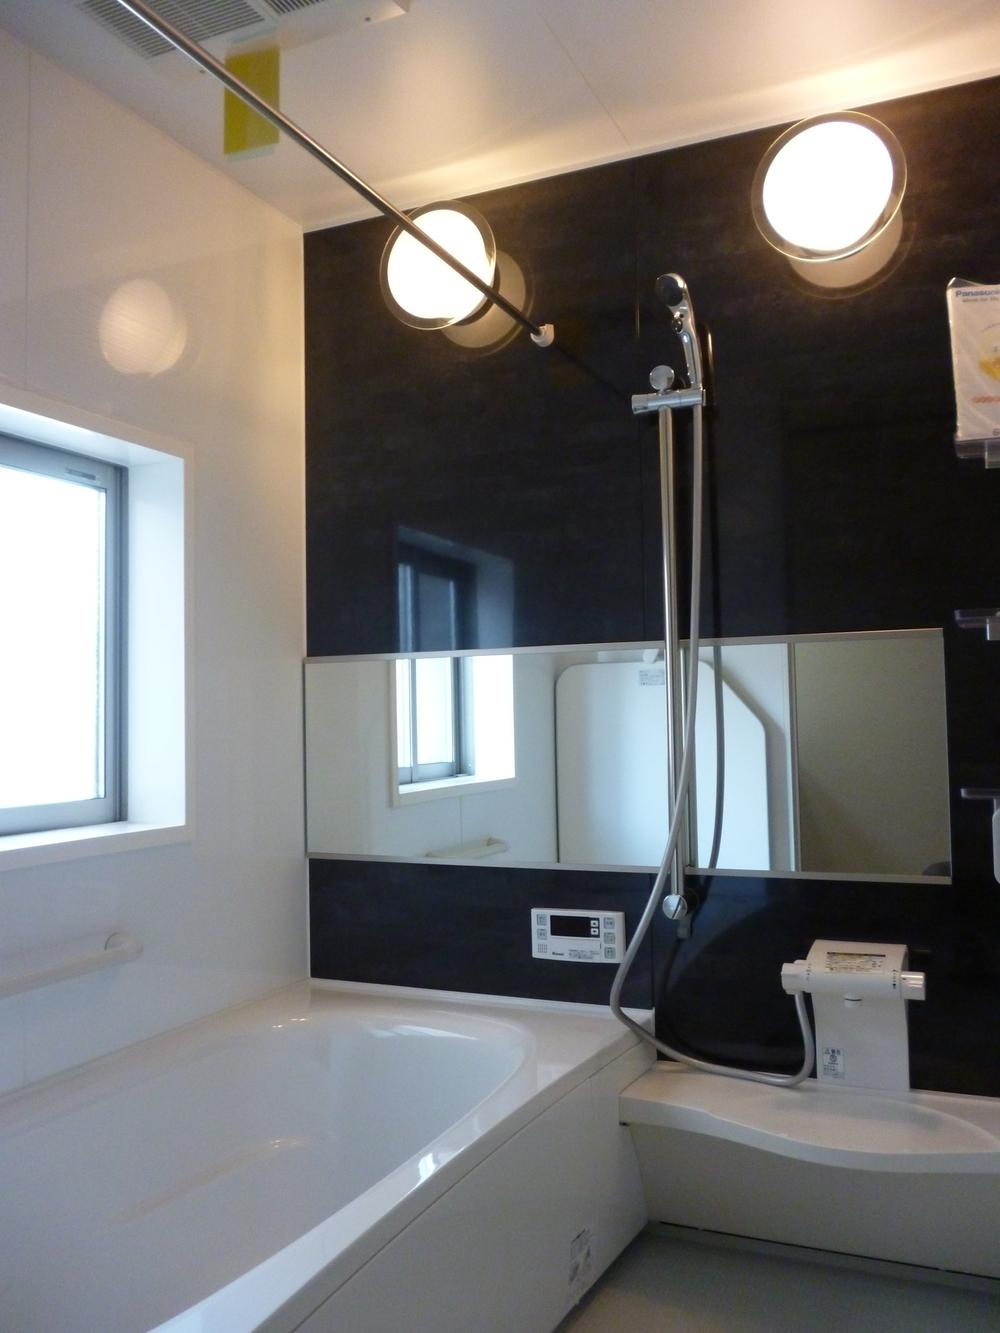 Same specifications photo (bathroom). (1 ・ 2 Building) same specification